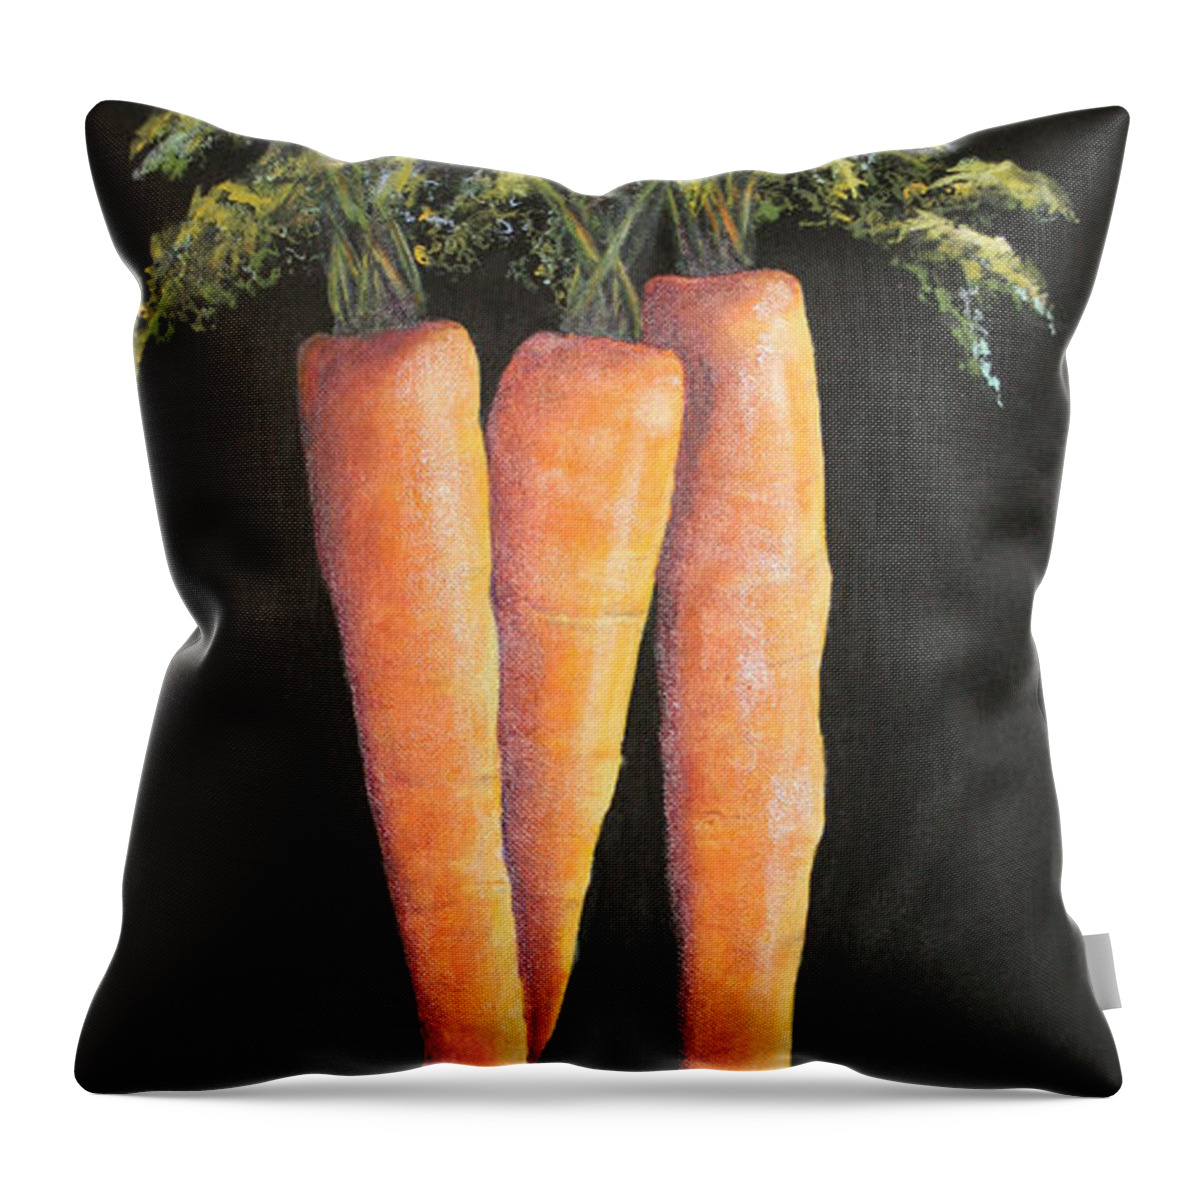 Kitchen Throw Pillow featuring the painting Carrots by Donna Tucker